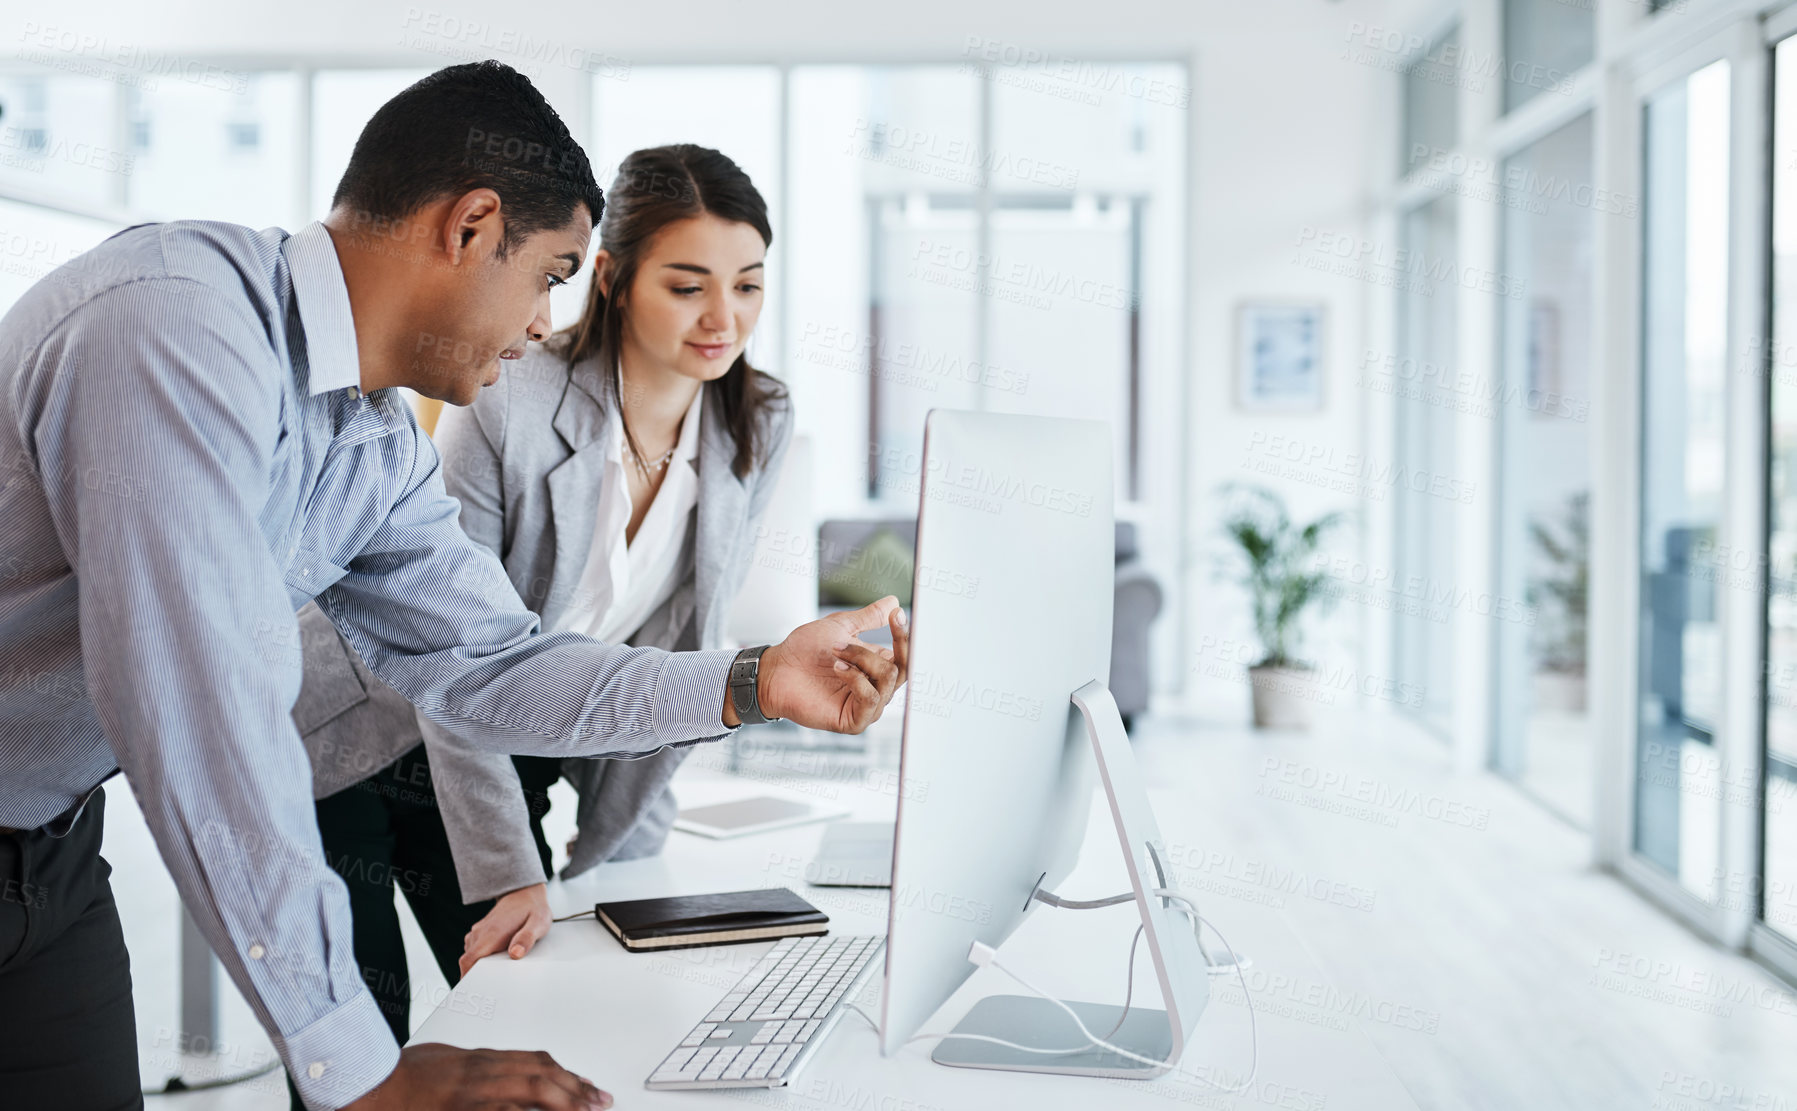 Buy stock photo Shot of a young businessman and businesswoman using a computer in a modern office